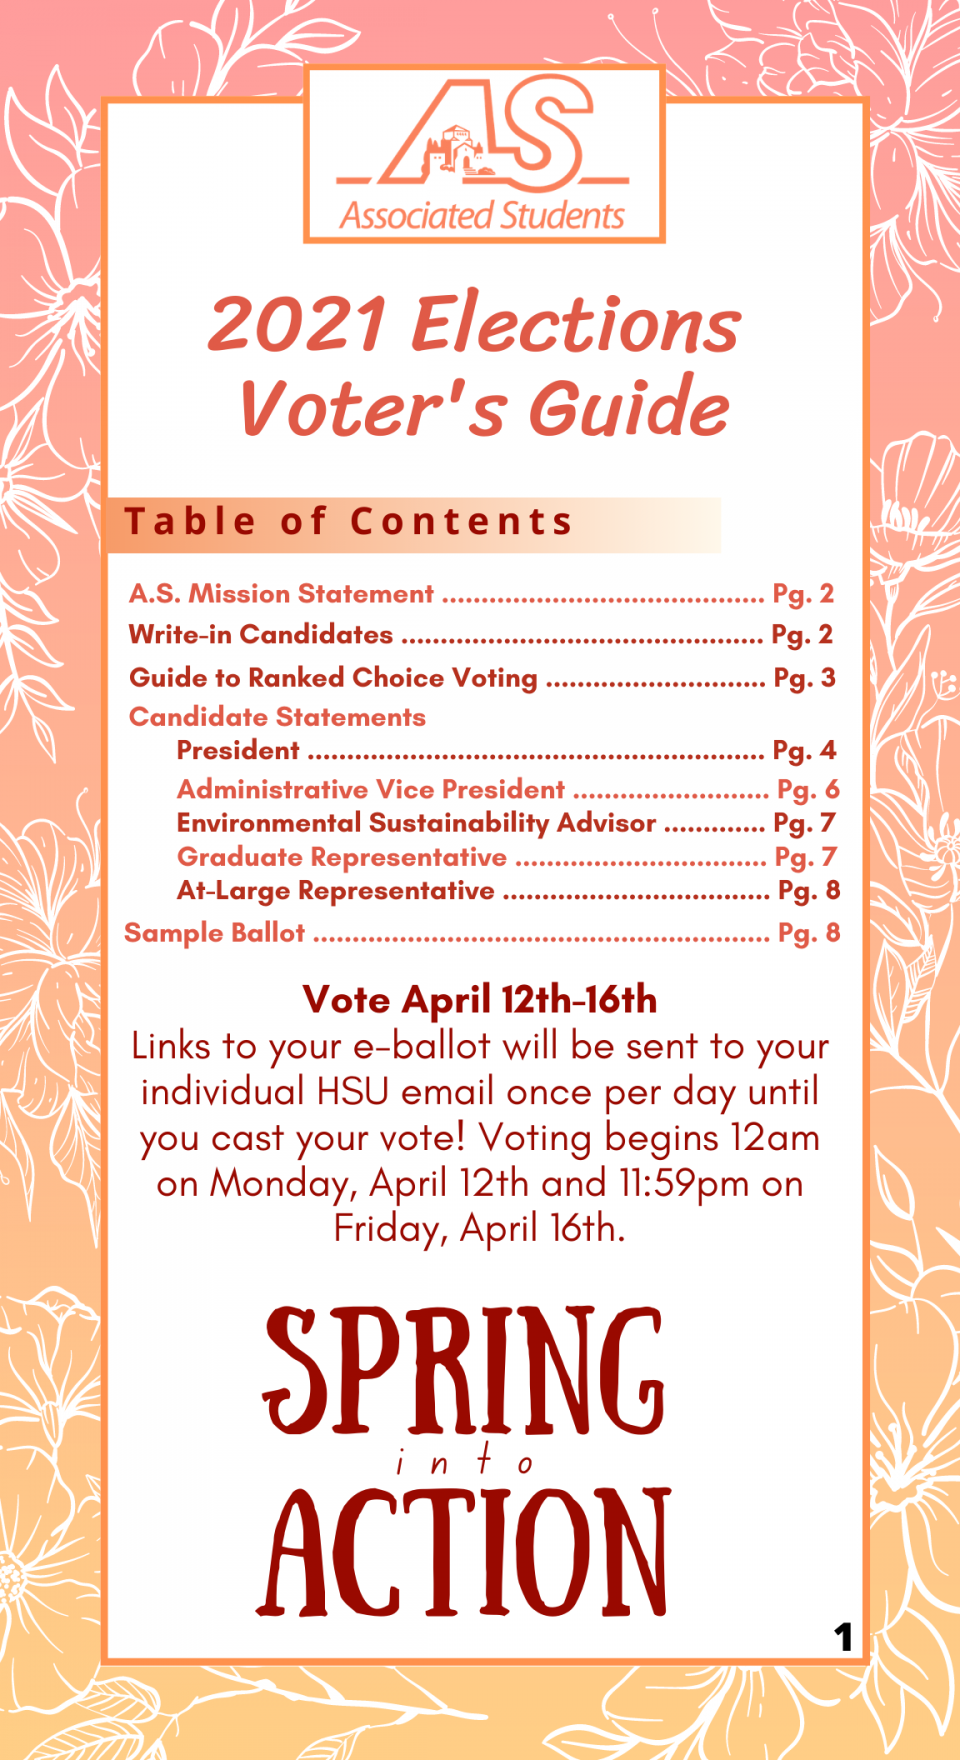 2021 Voter's Guide-page 1